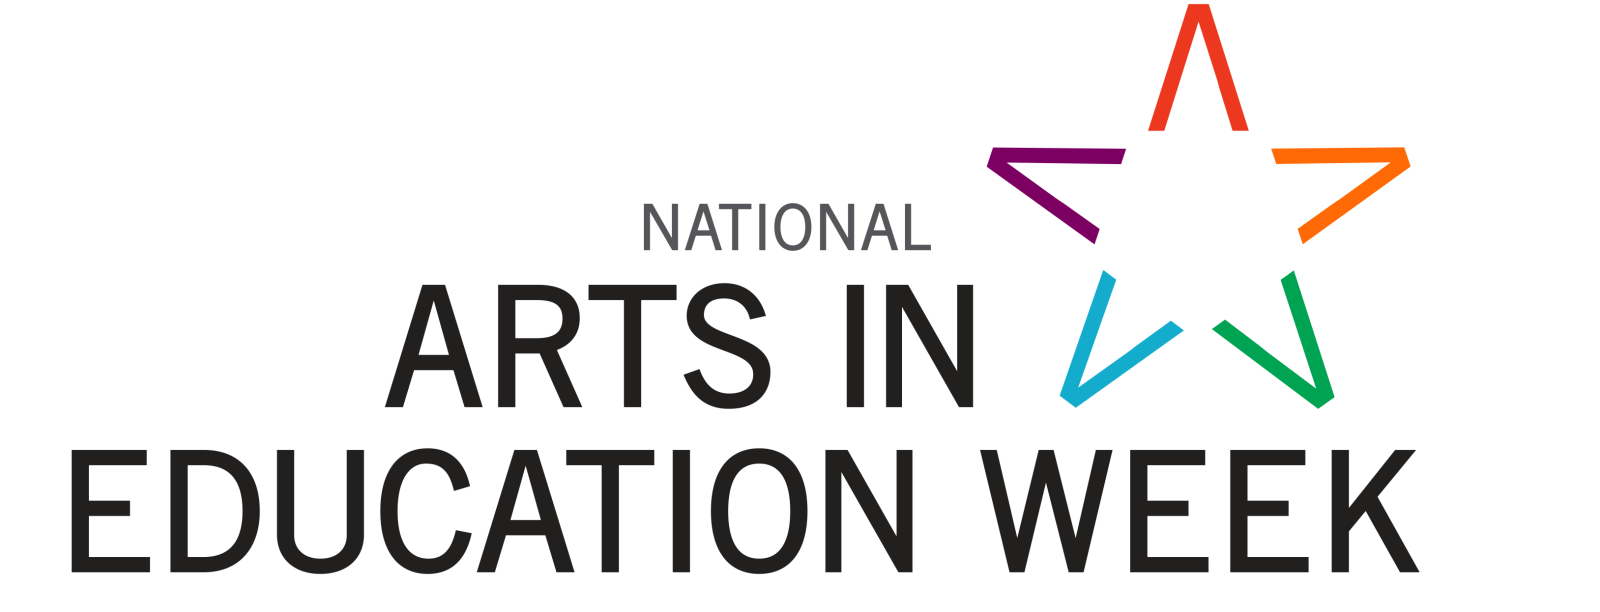 National Arts In Education Week is September 1117 Tennessee Arts